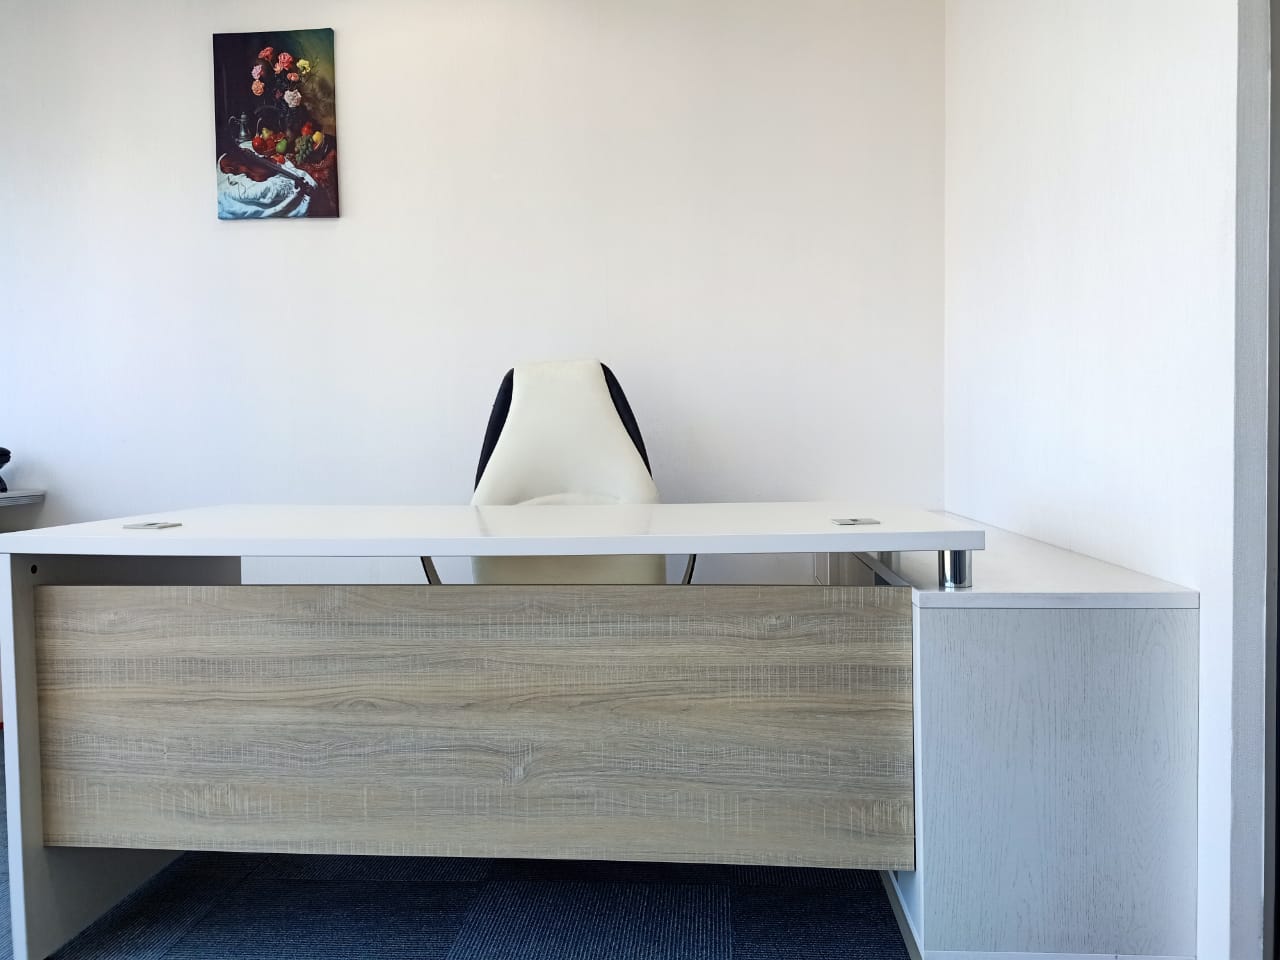 Free Parking | Furnished Working Space in a Strategic Location